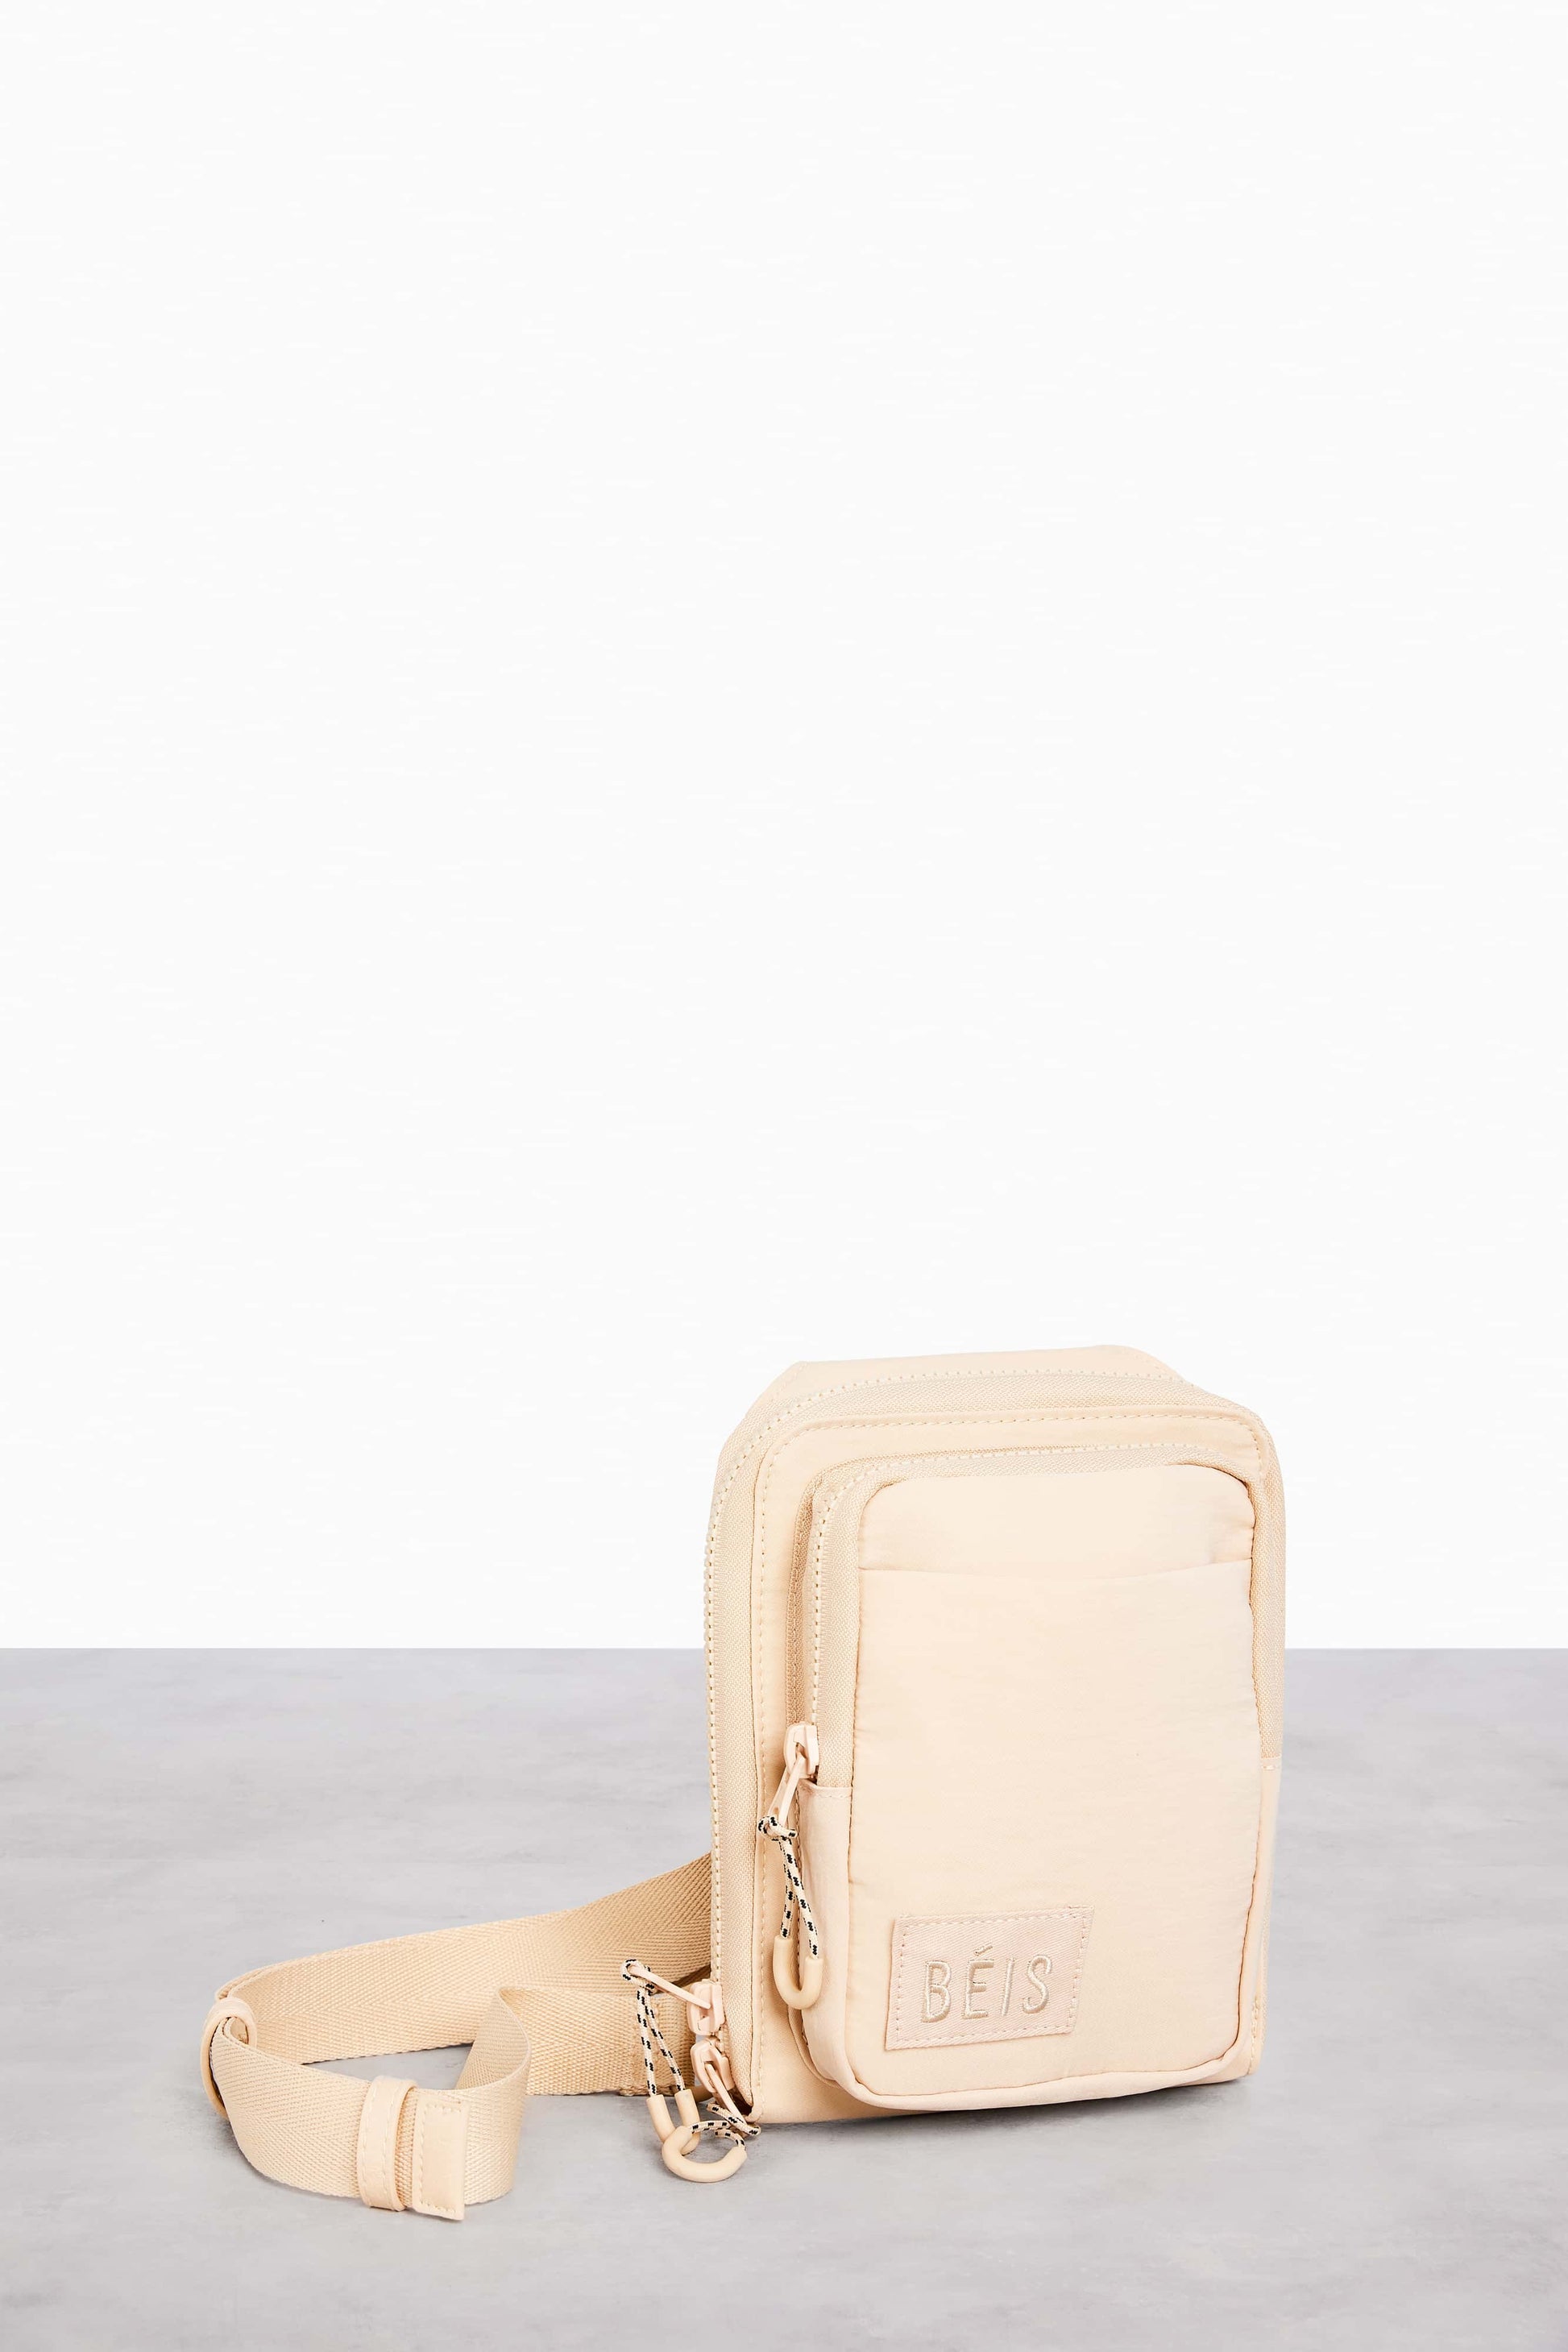 BÉIS 'The Sport Pack' in Beige - Athletic Fanny Pack For Sports